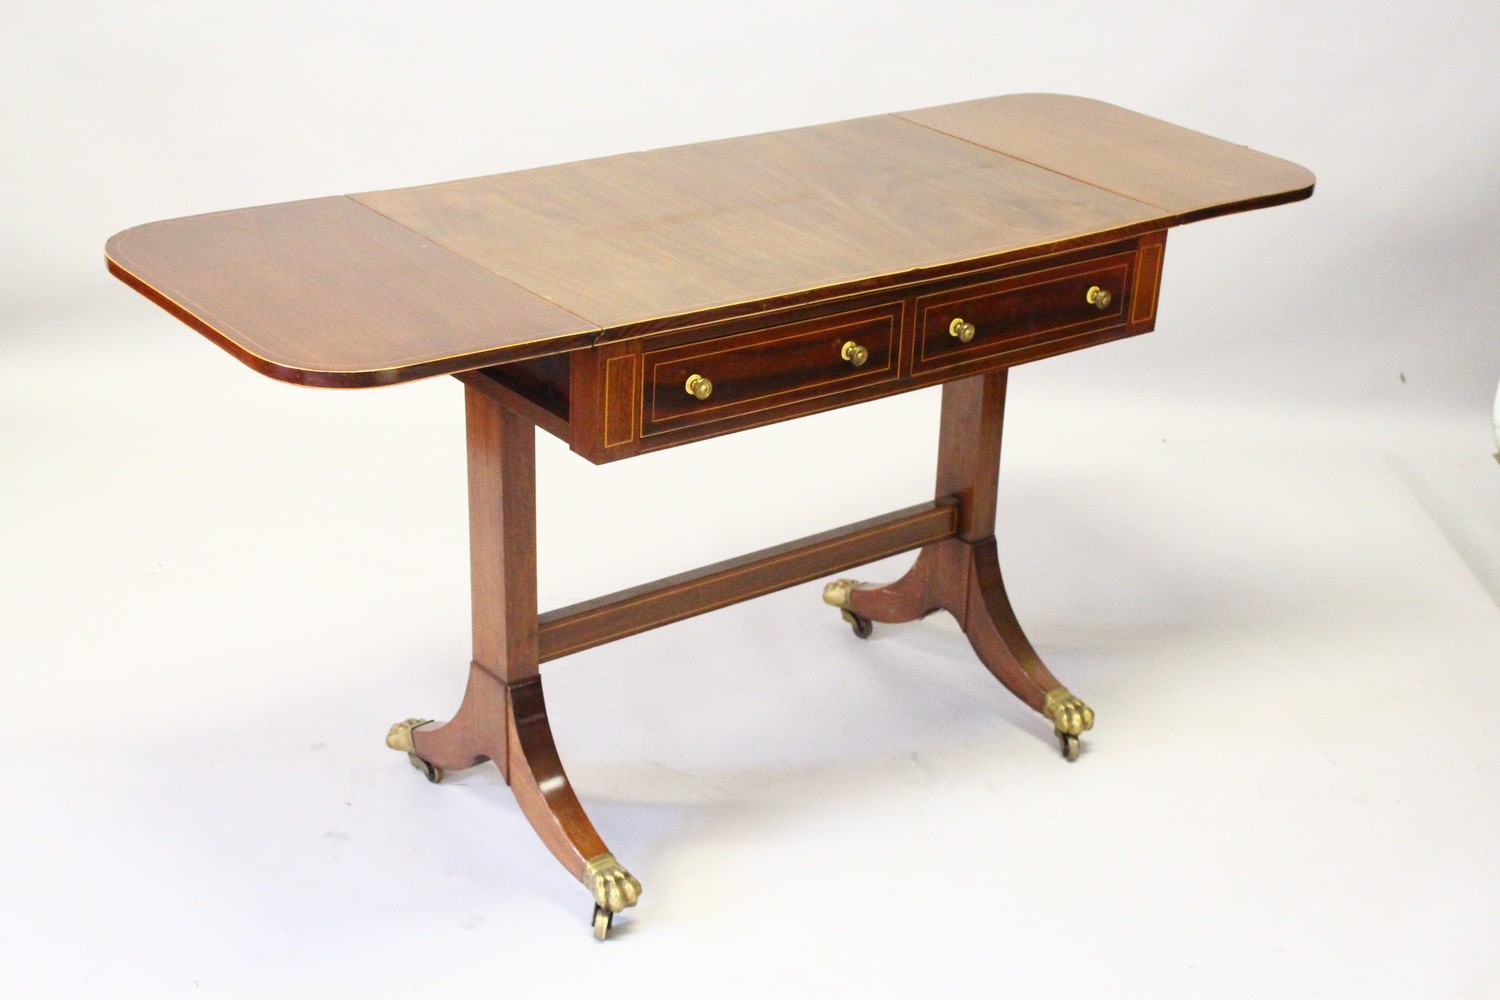 A GEORGIAN STYLE MAHOGANY INLAID SOFA TABLE, with folding flap, two small drawers, on end supports - Image 10 of 11